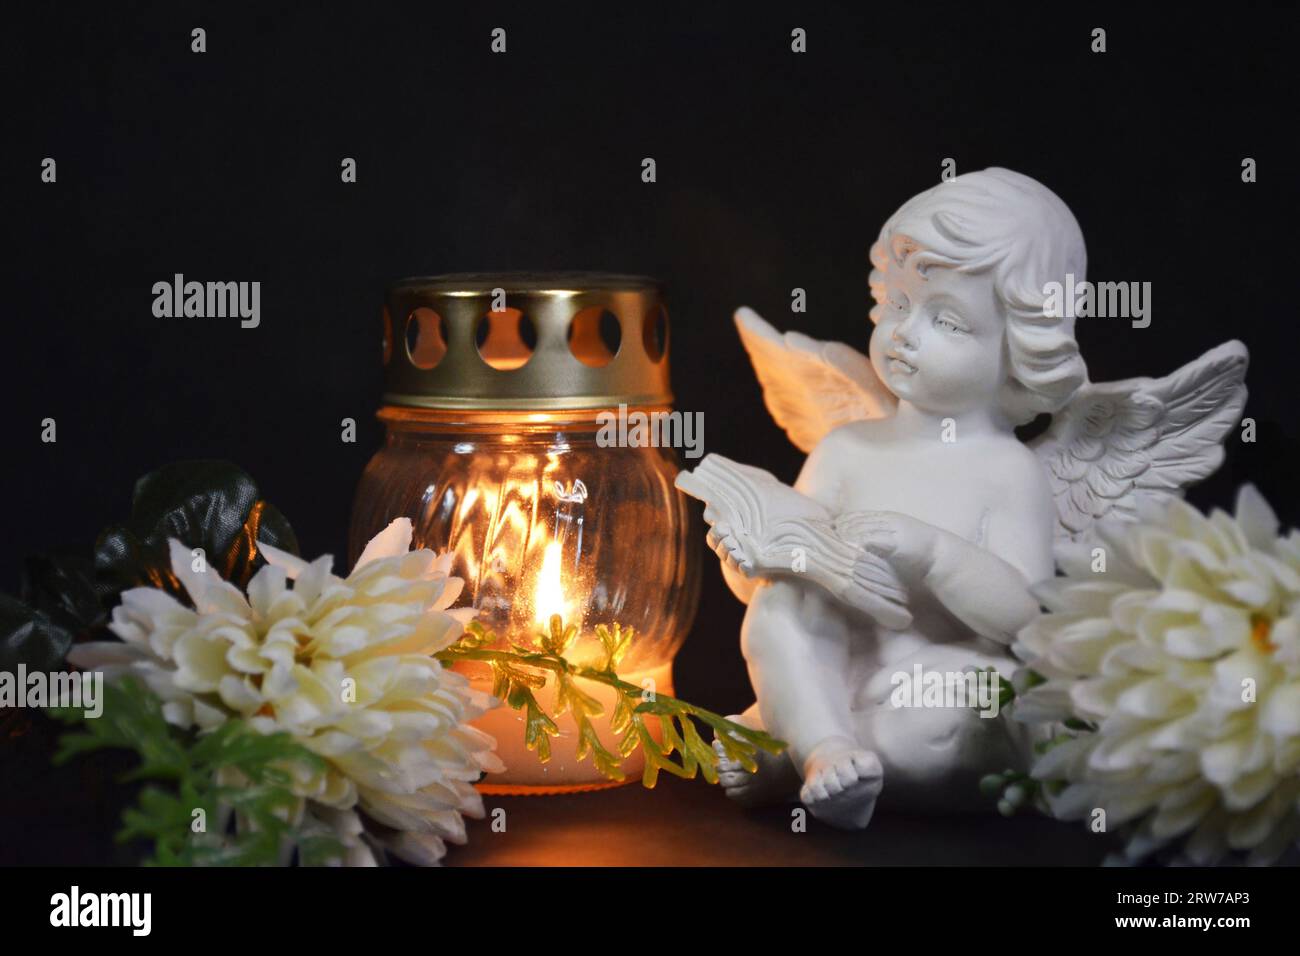 Sympathy card with an angel figurine, votive candle and flowers on black background Stock Photo